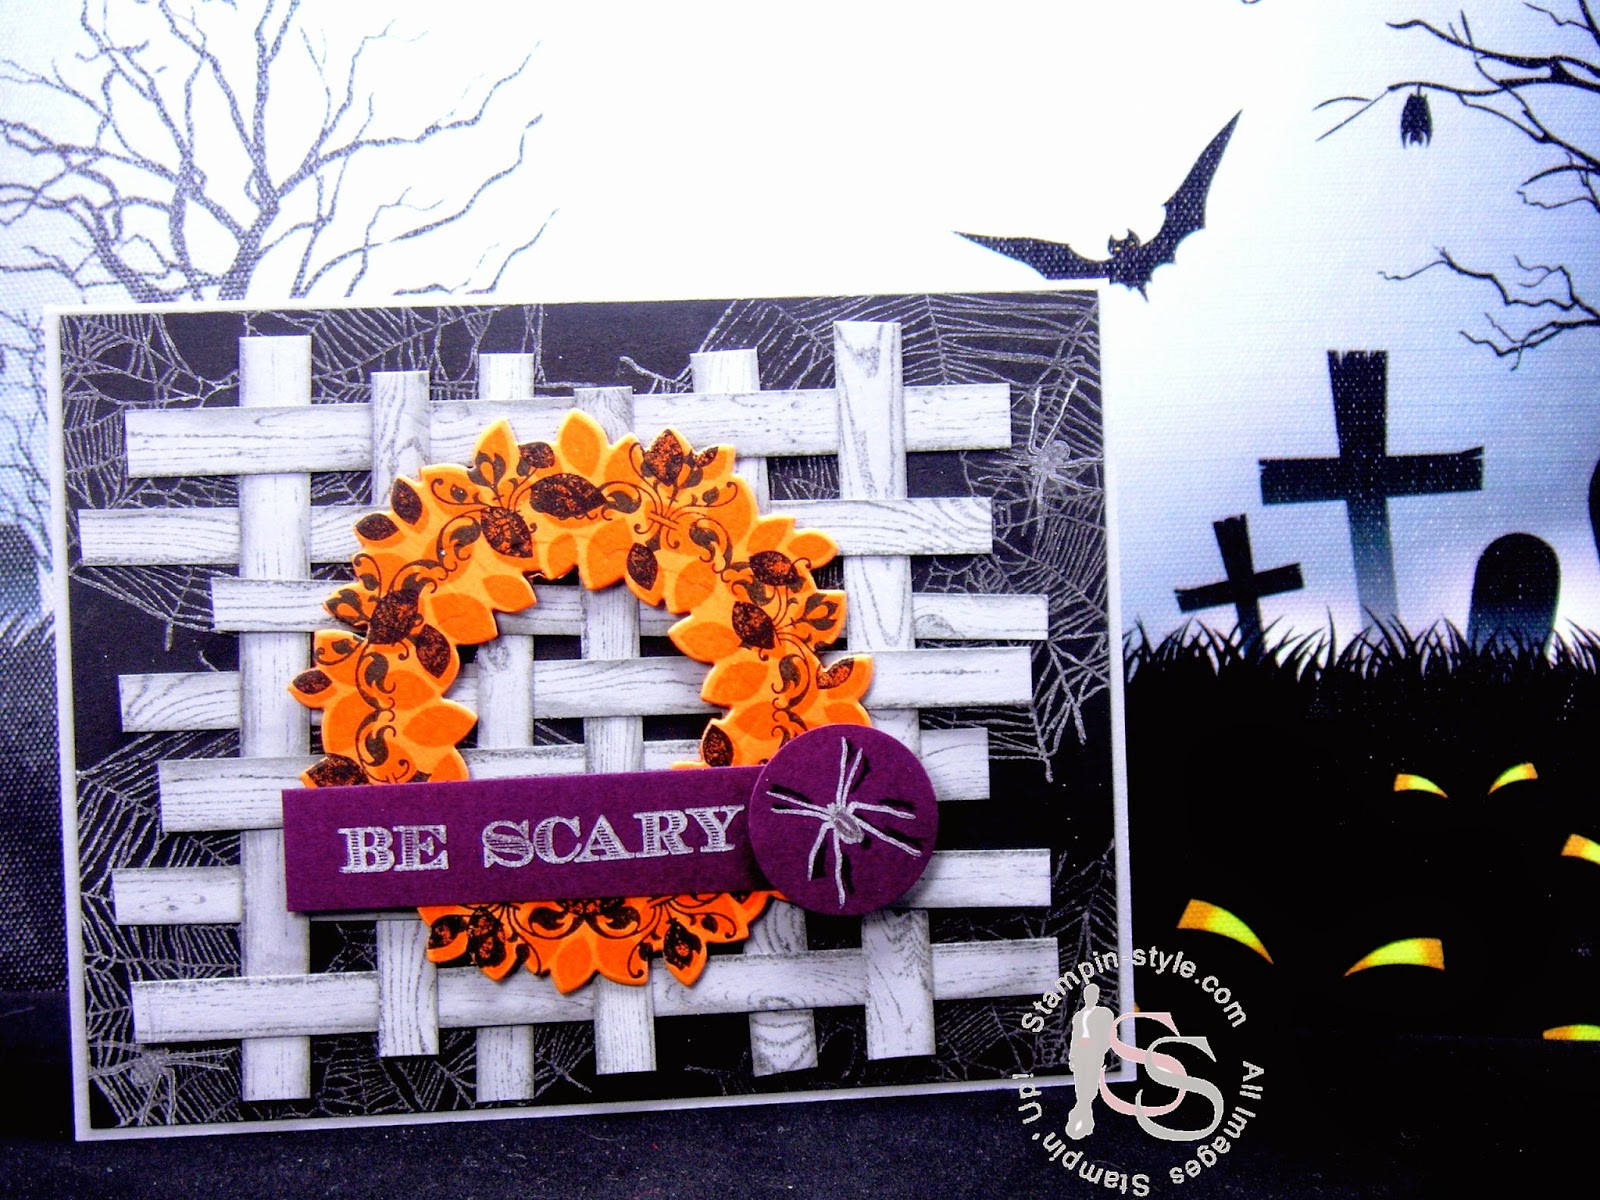 http://stampin-style.typepad.com/stampin-style/2014/08/paper-players-210-be-scary.html